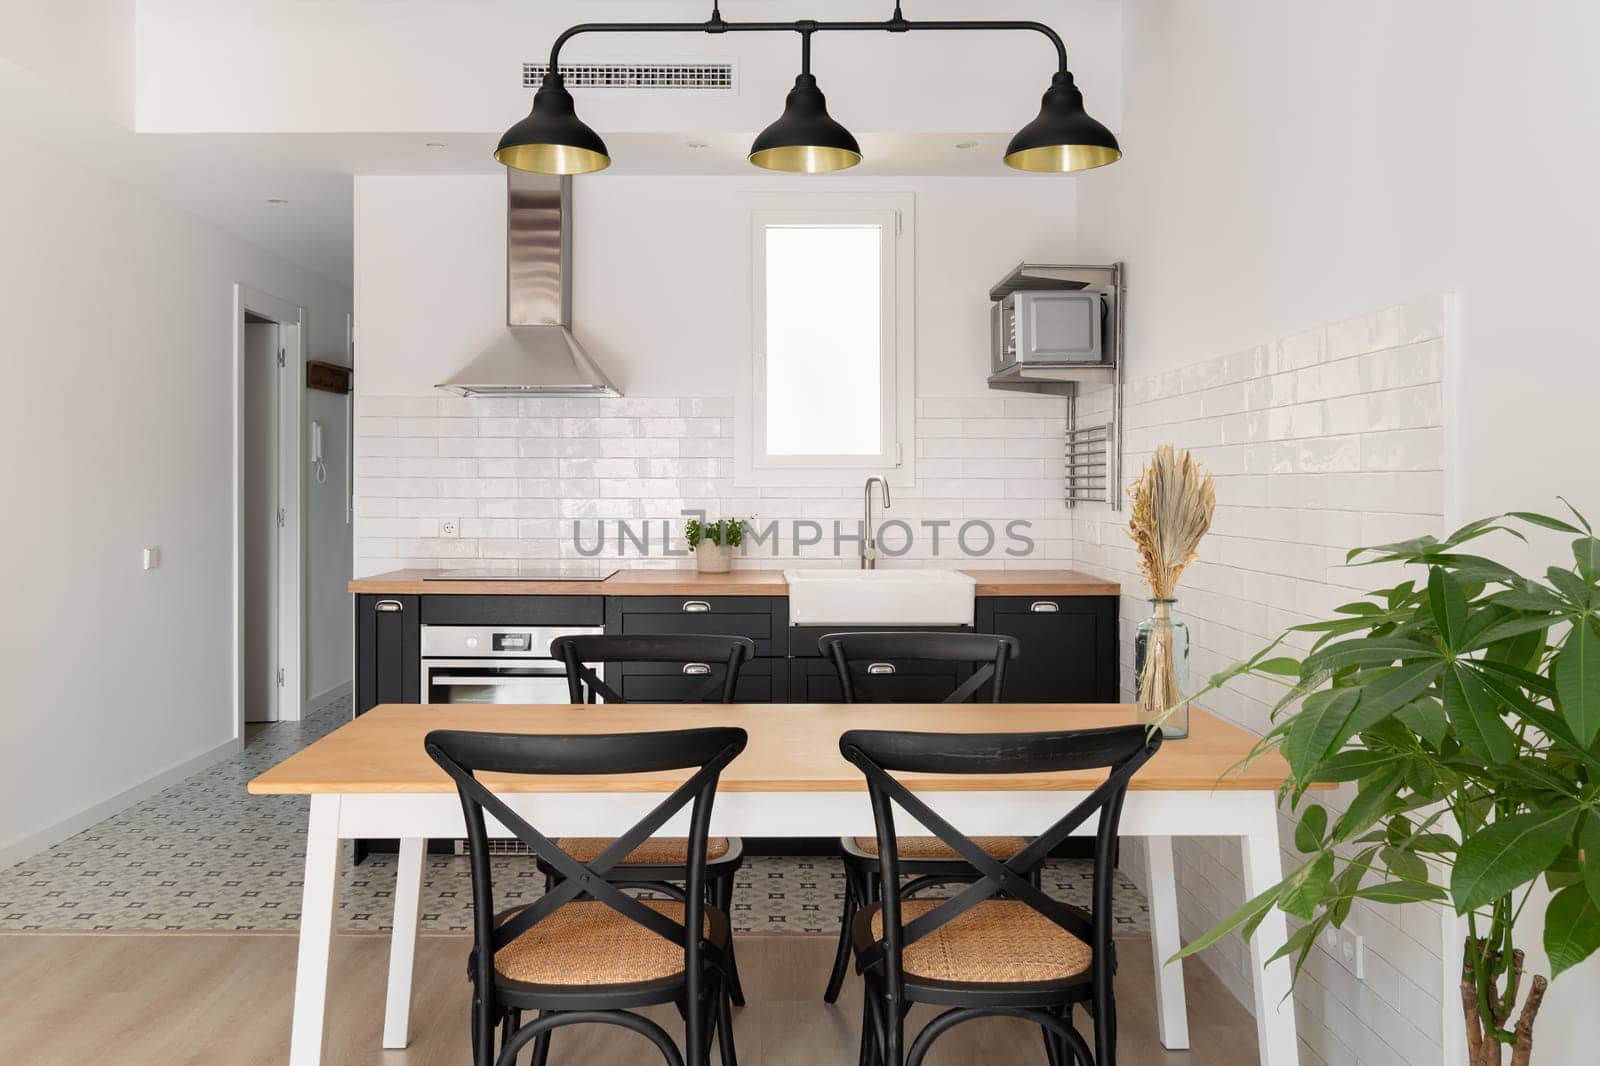 Horizontal shot of a black and white kitchen with a loft ceiling combined with a dining area overlooking the corridor. Concept of renovation in new building for a young couple by apavlin